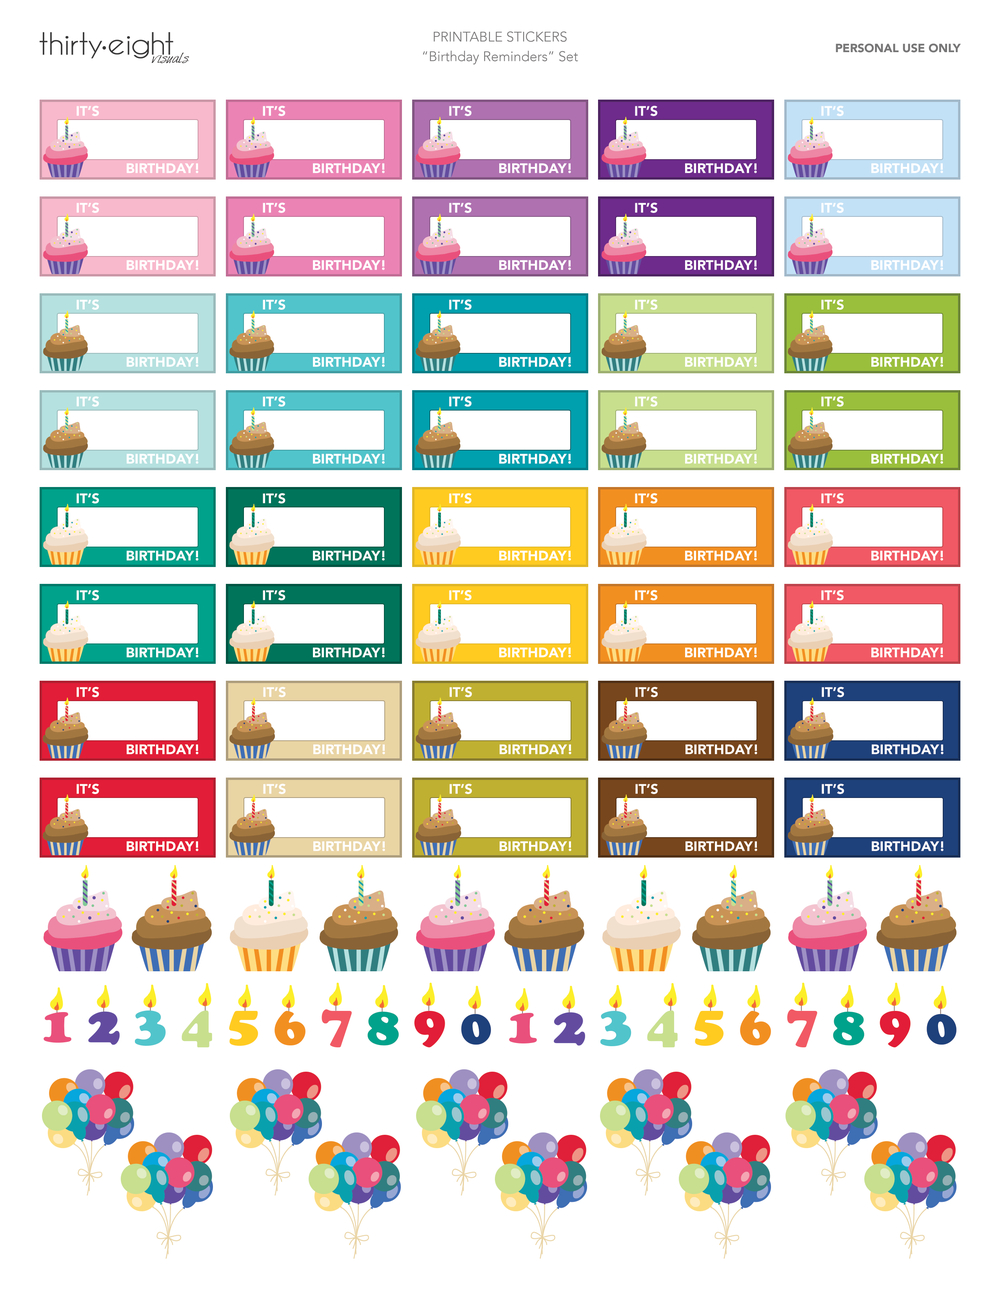 Cute Birthday Reminder Stickers For Your Planner! Click Here